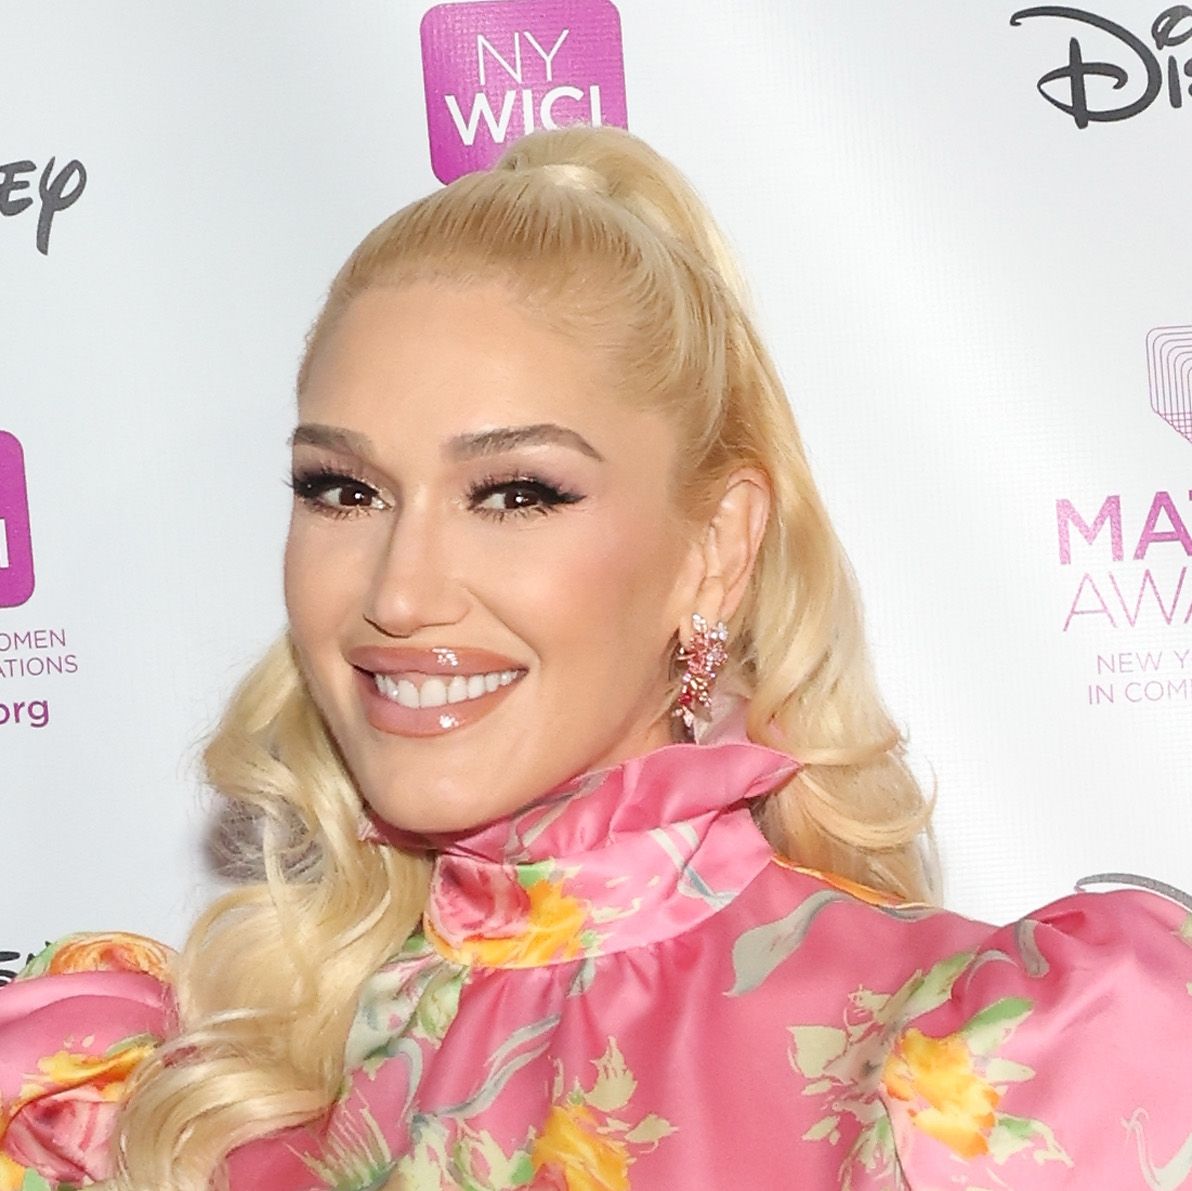 Gwen Stefani Has Sculpted Abs In A Bra Top And Fishnets In IG Vid